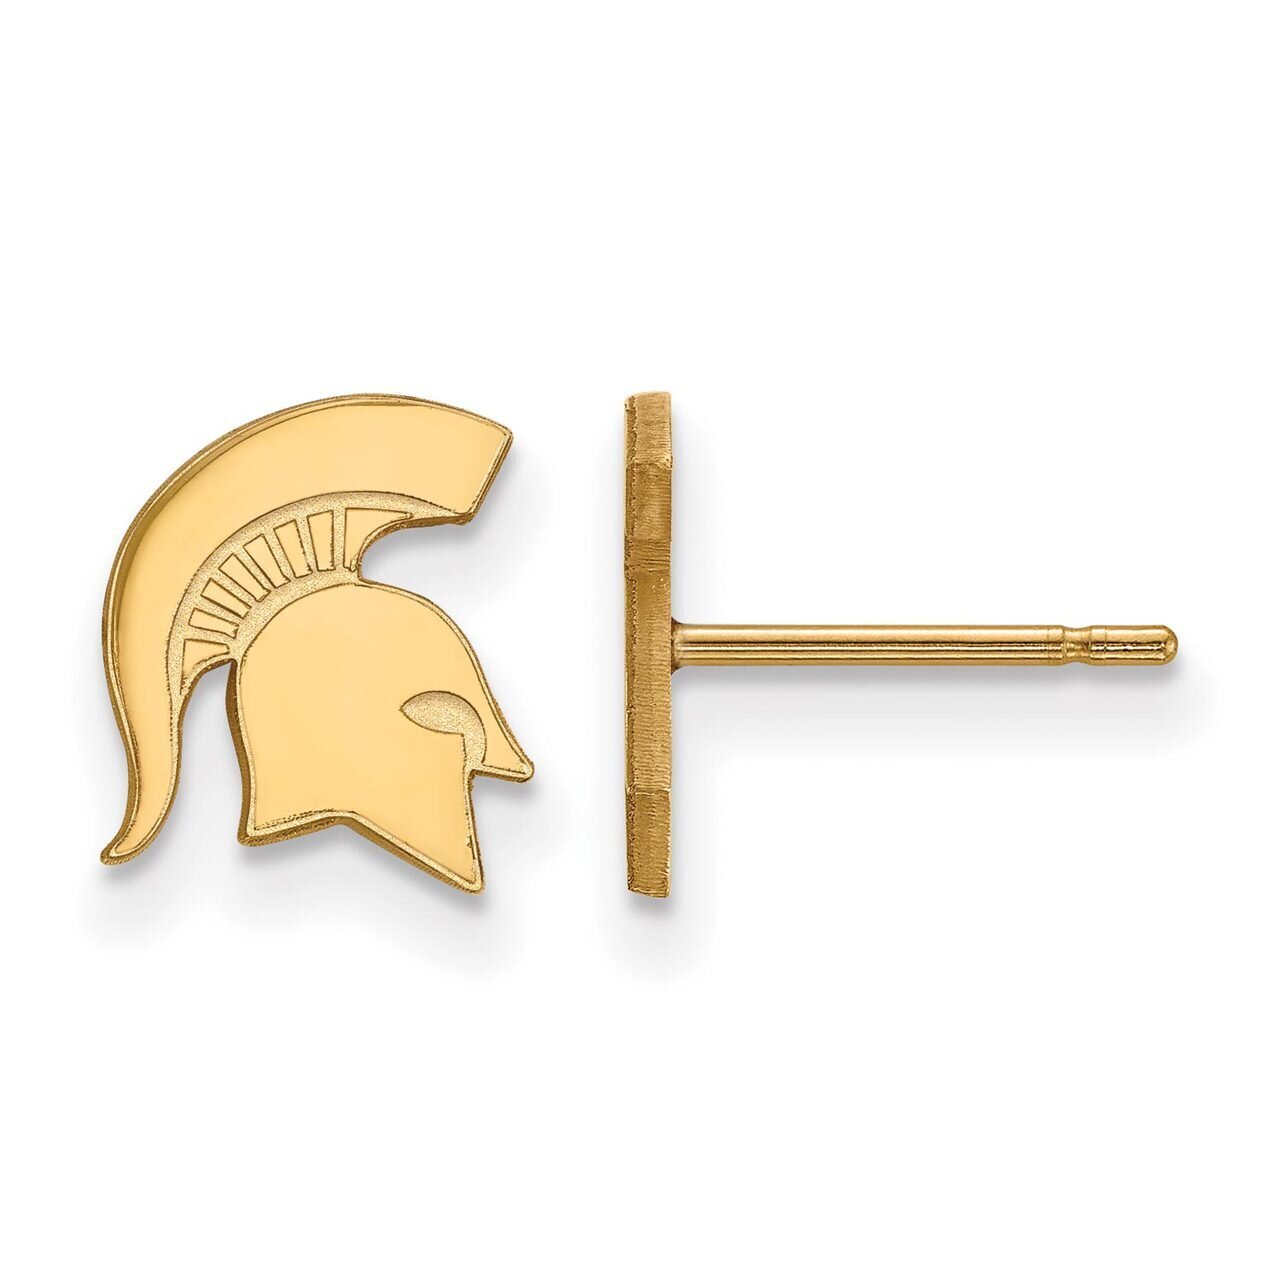 Michigan State University x-Small Post Earring 10k Yellow Gold 1Y050MIS